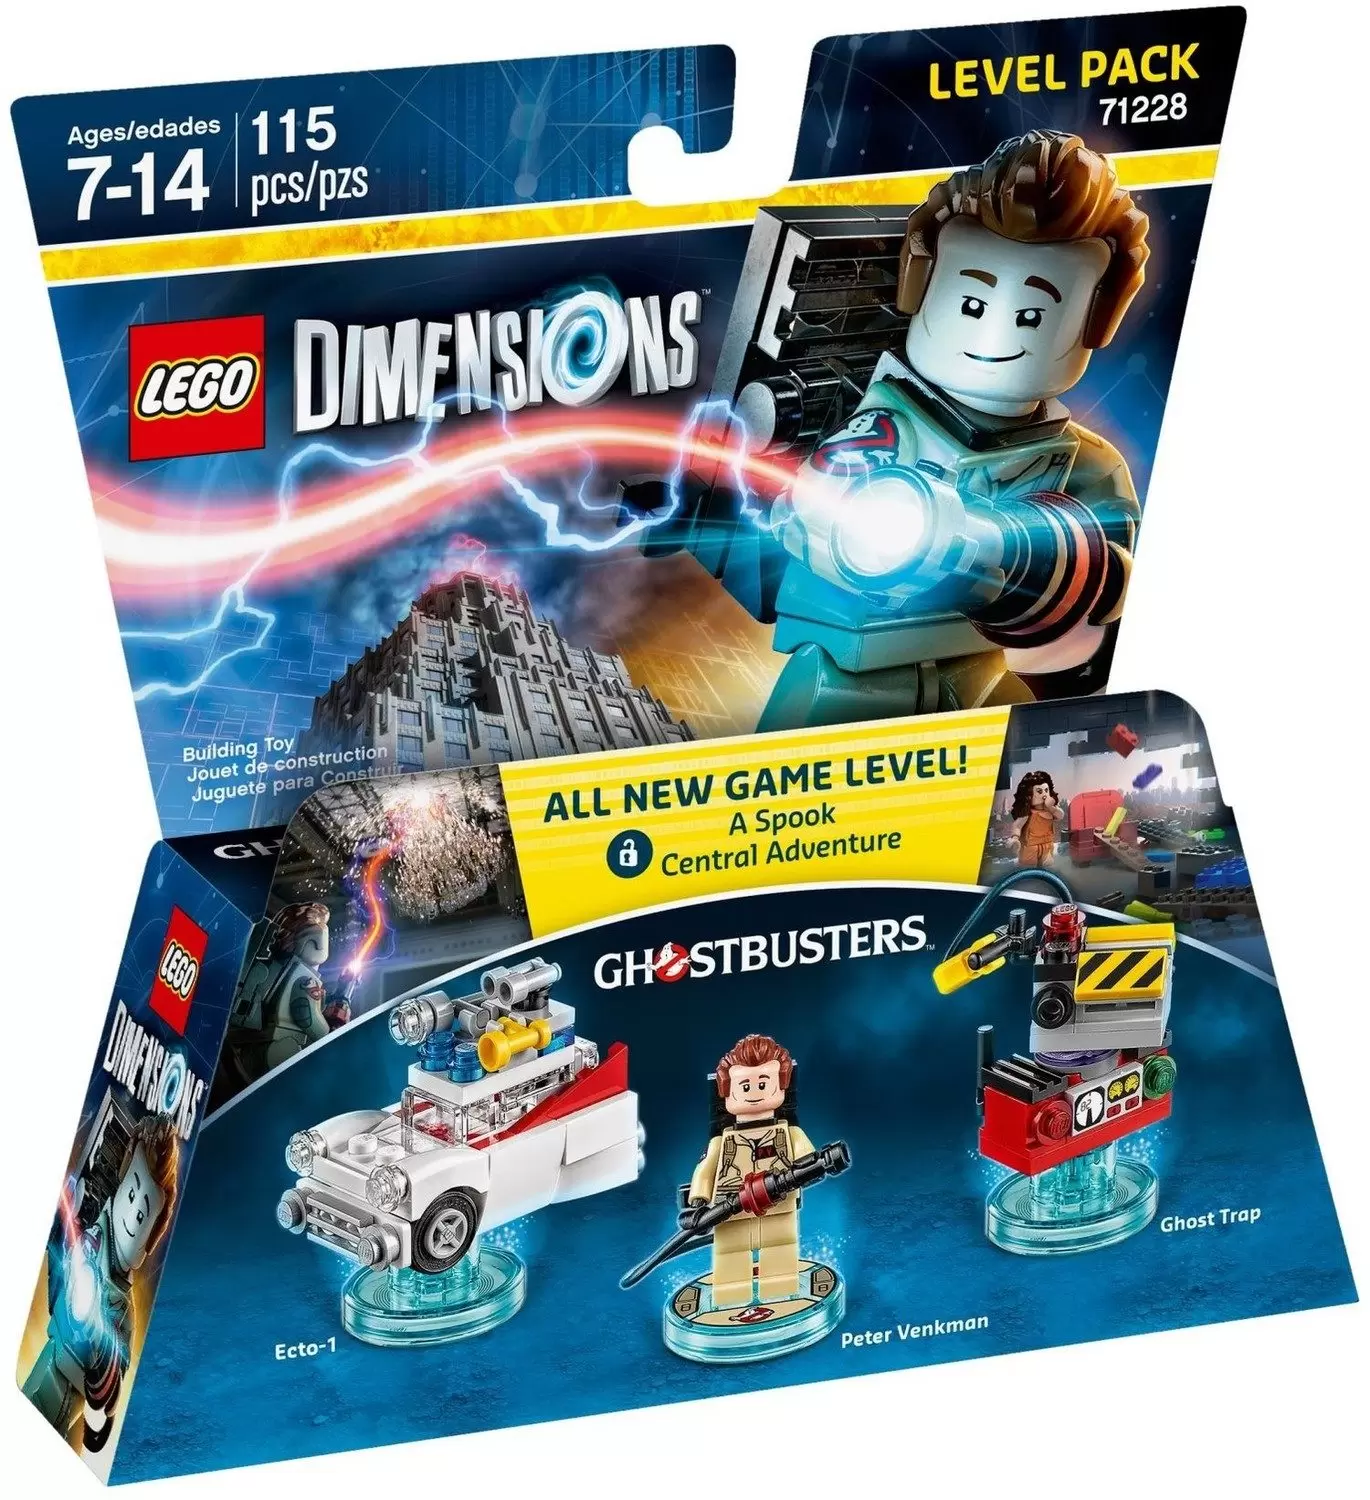 Ghostbusters Level Pack - LEGO Dimensions 71228